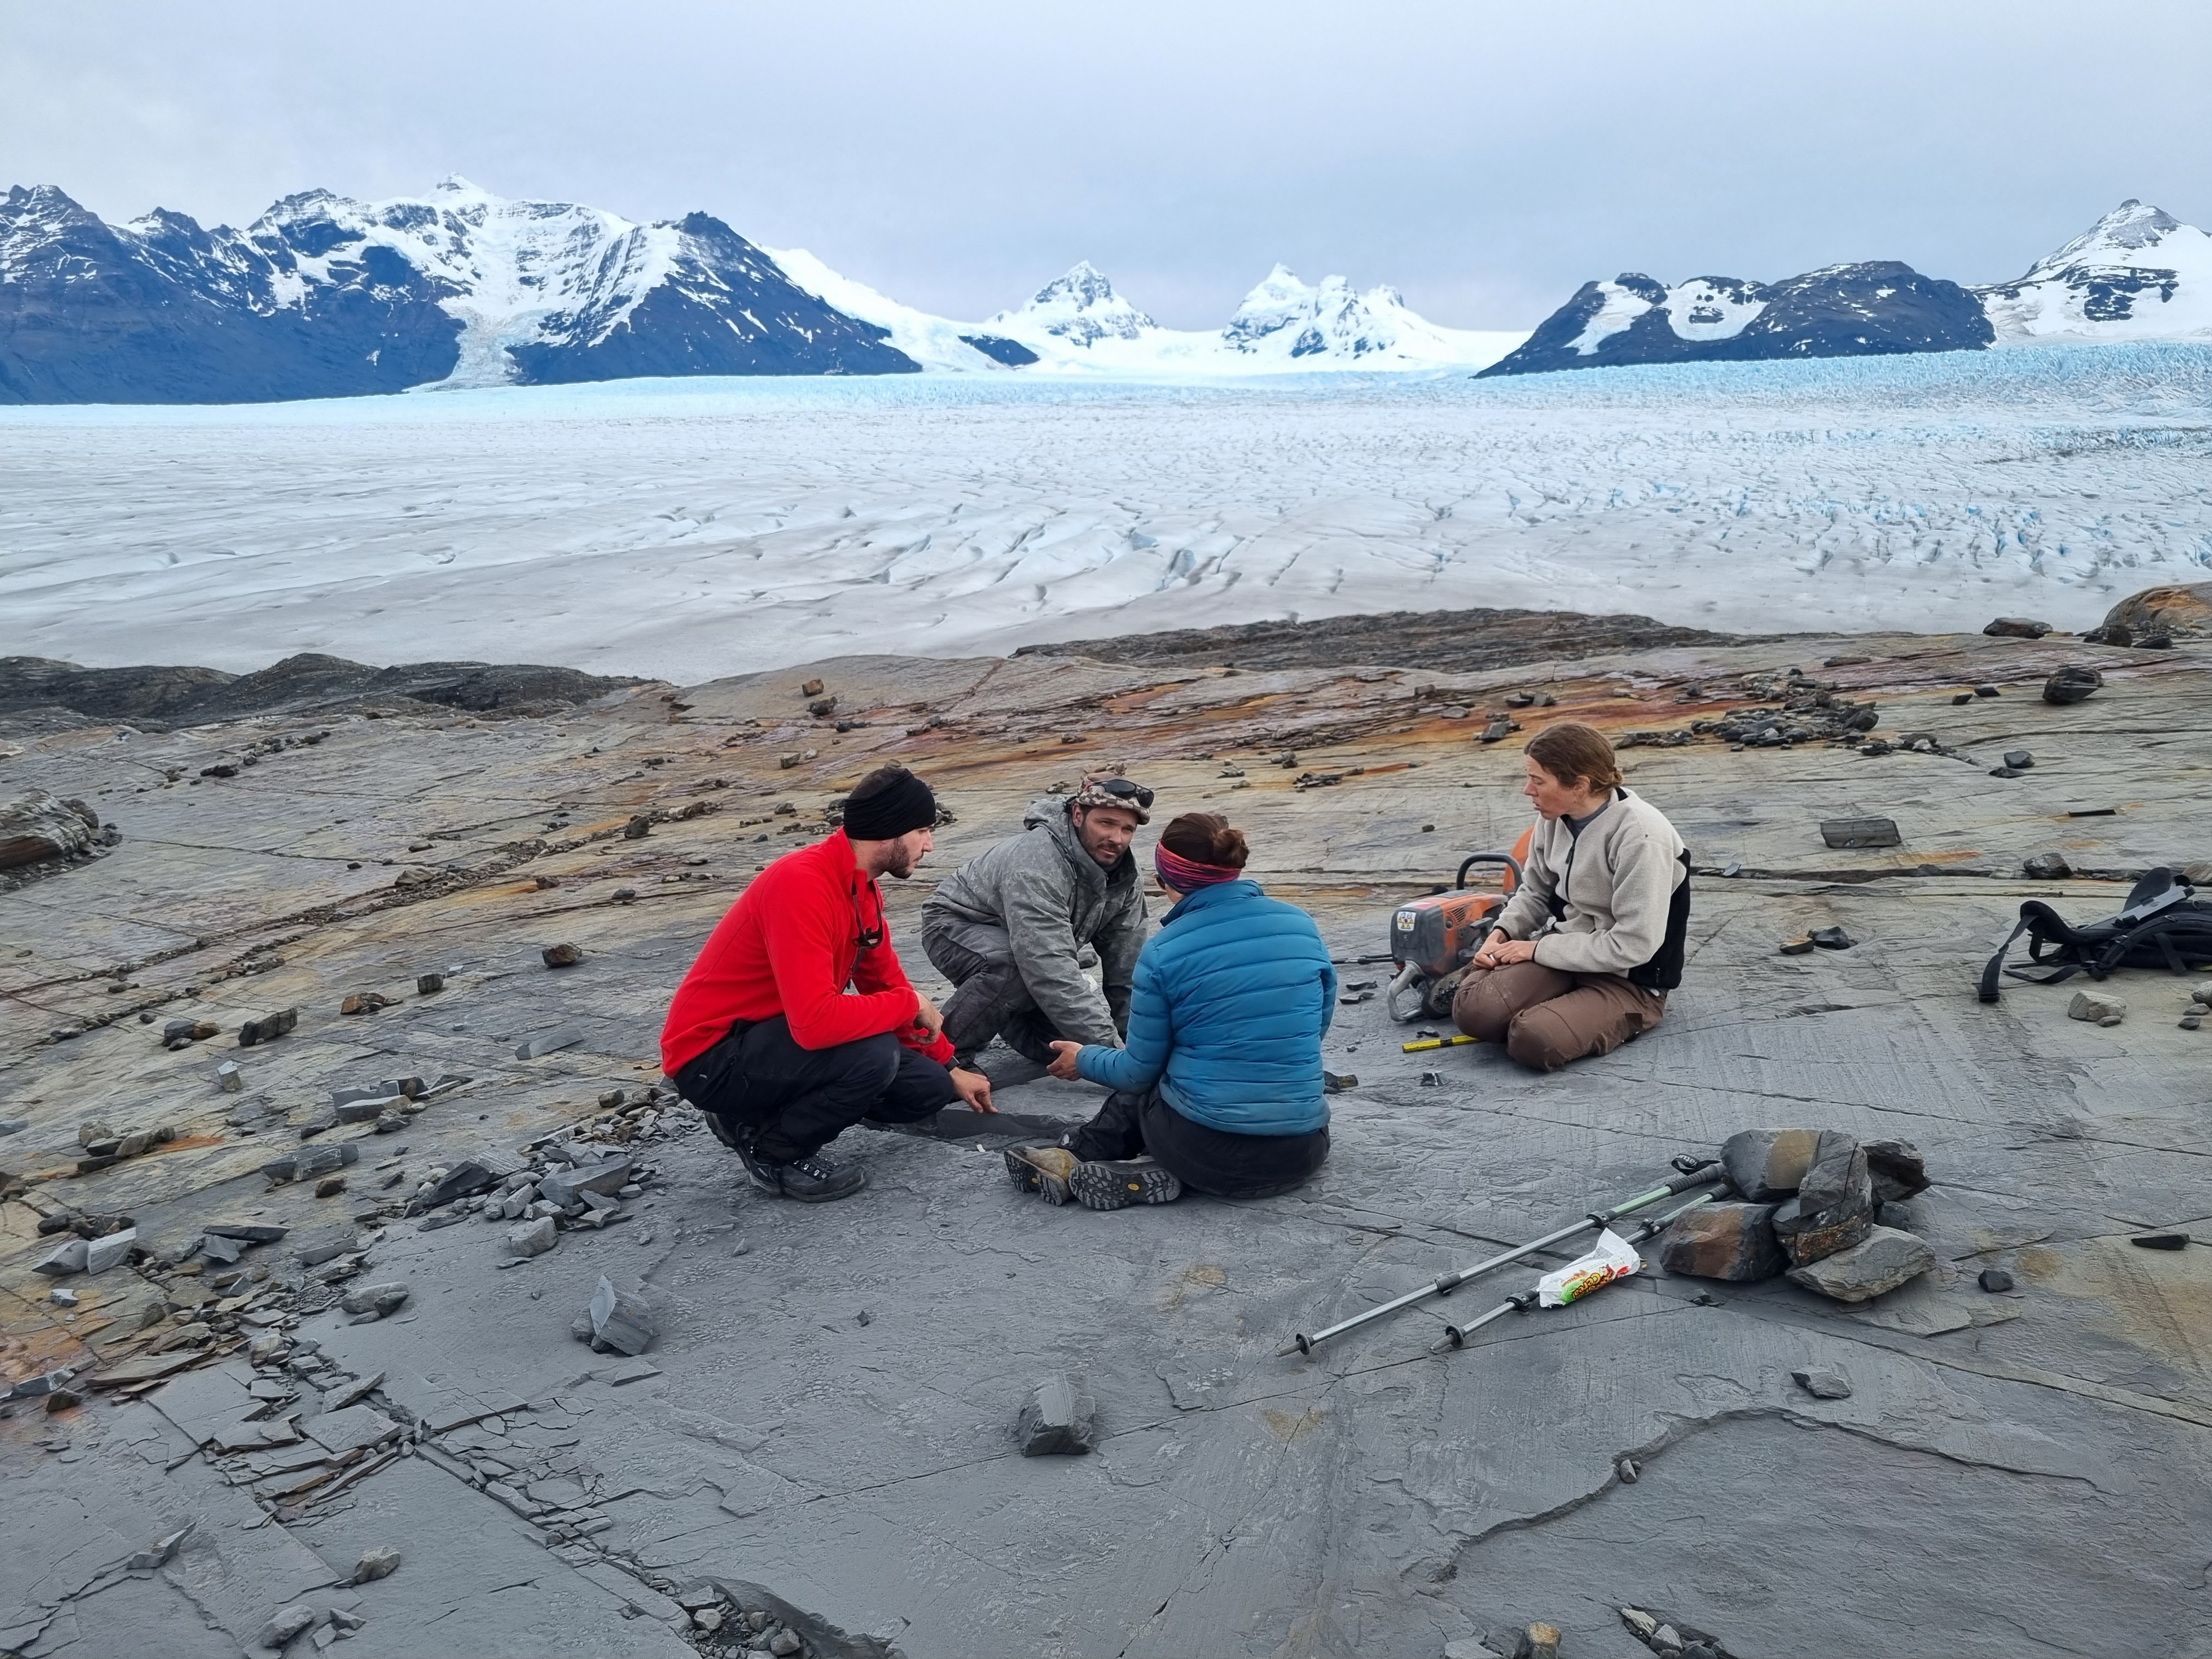 Paleontologists of the GAIA Antarctic Research Center of the University of Magallanes, recover the first fossil of a four-meter Ichthyosaur at Tyndall Glacier area in the Chilean Patagonia, Magallanes